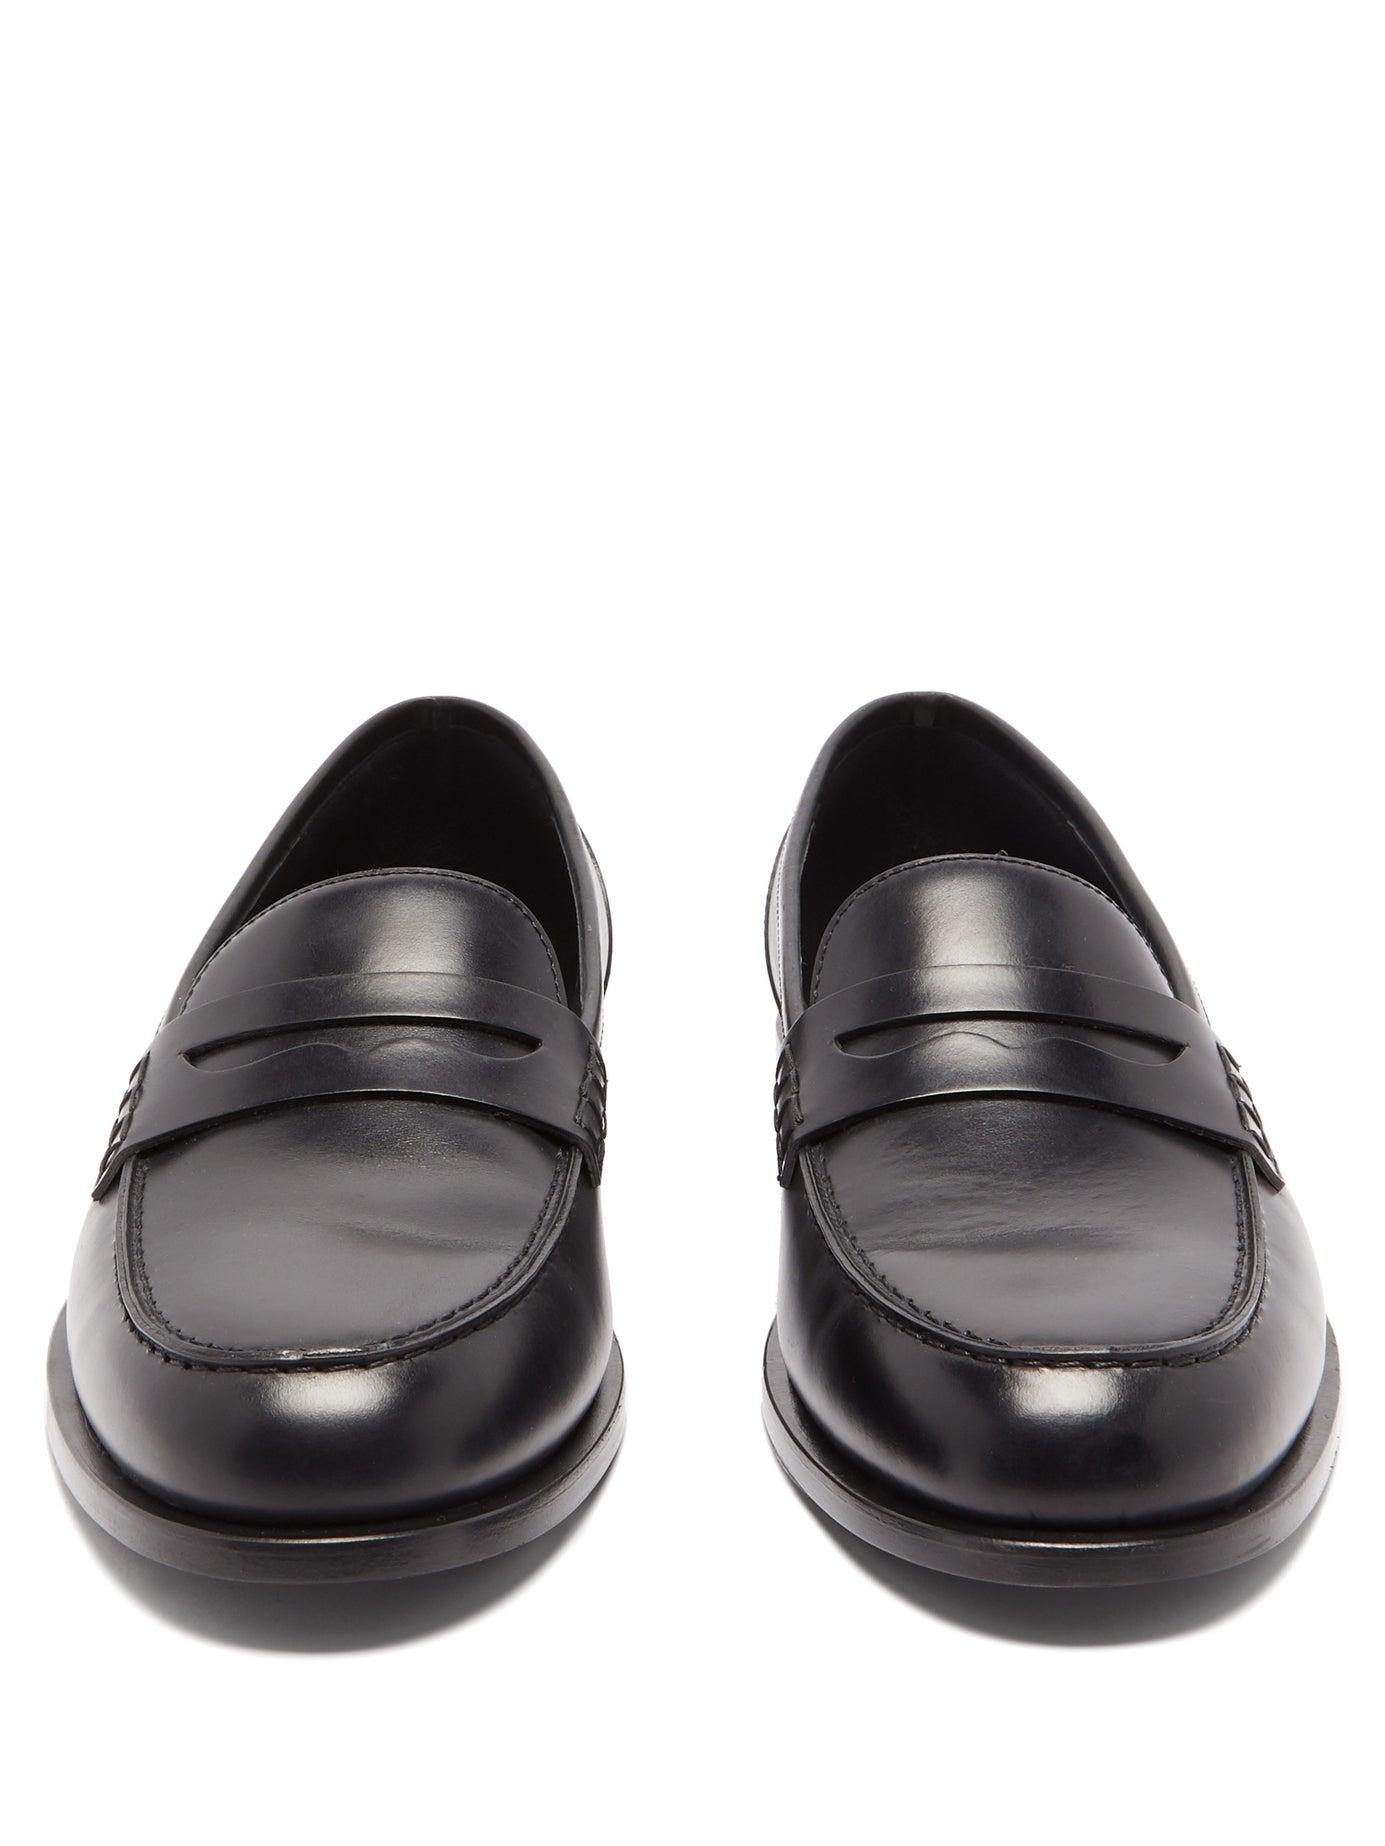 Balmain Michael Leather Penny Loafers in Black for Men - Lyst